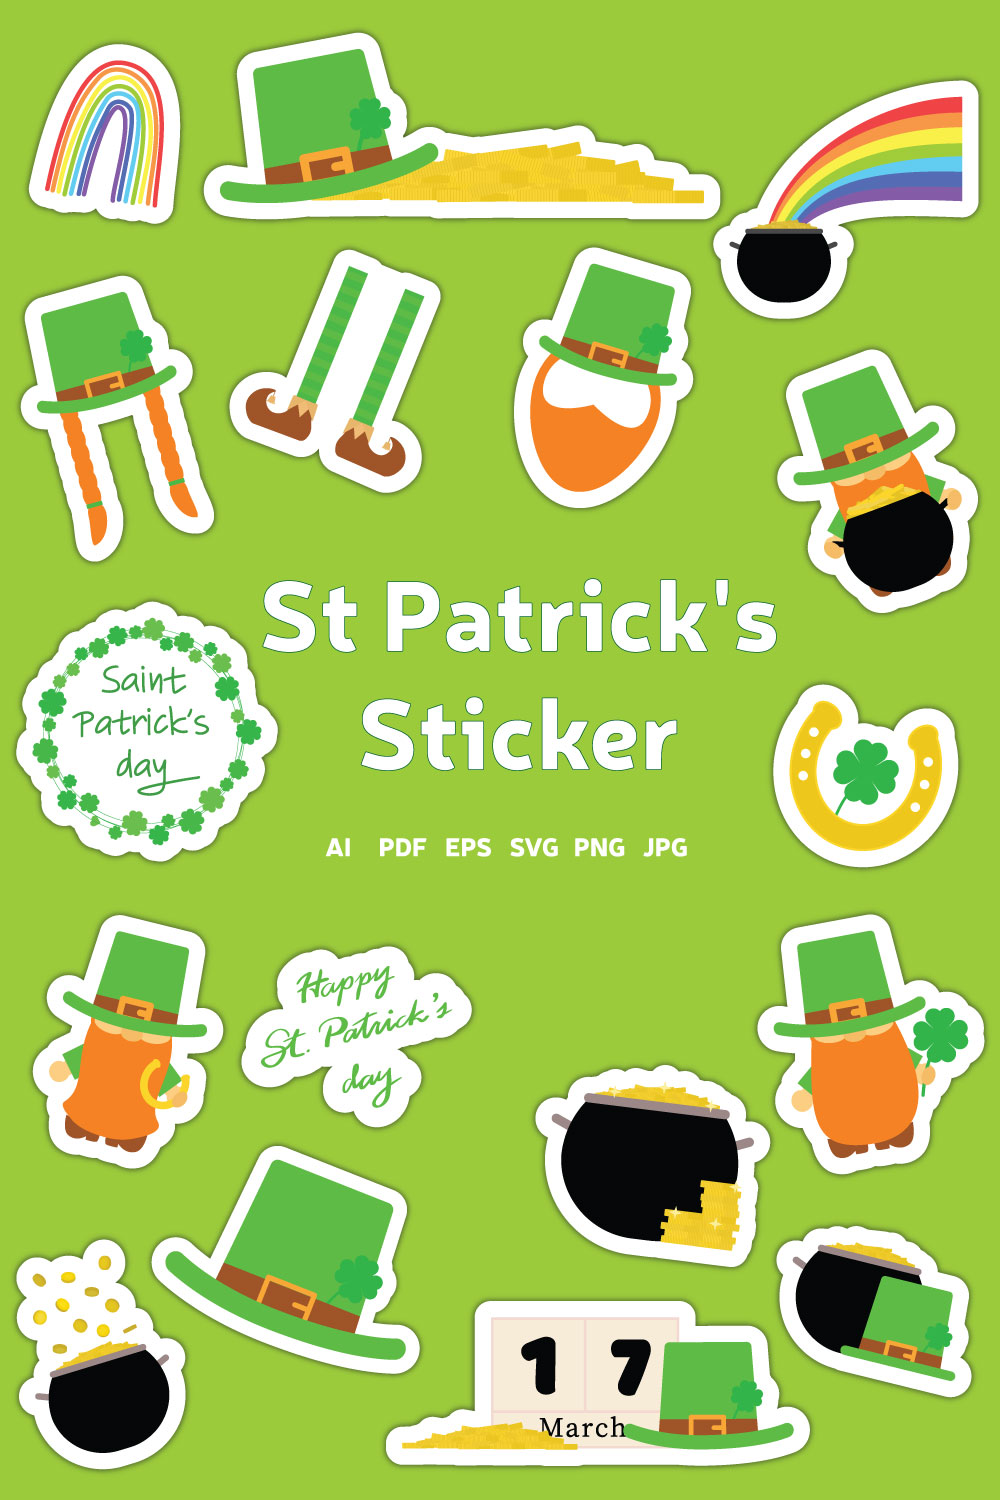 St Patrick stickers pinterest preview image.